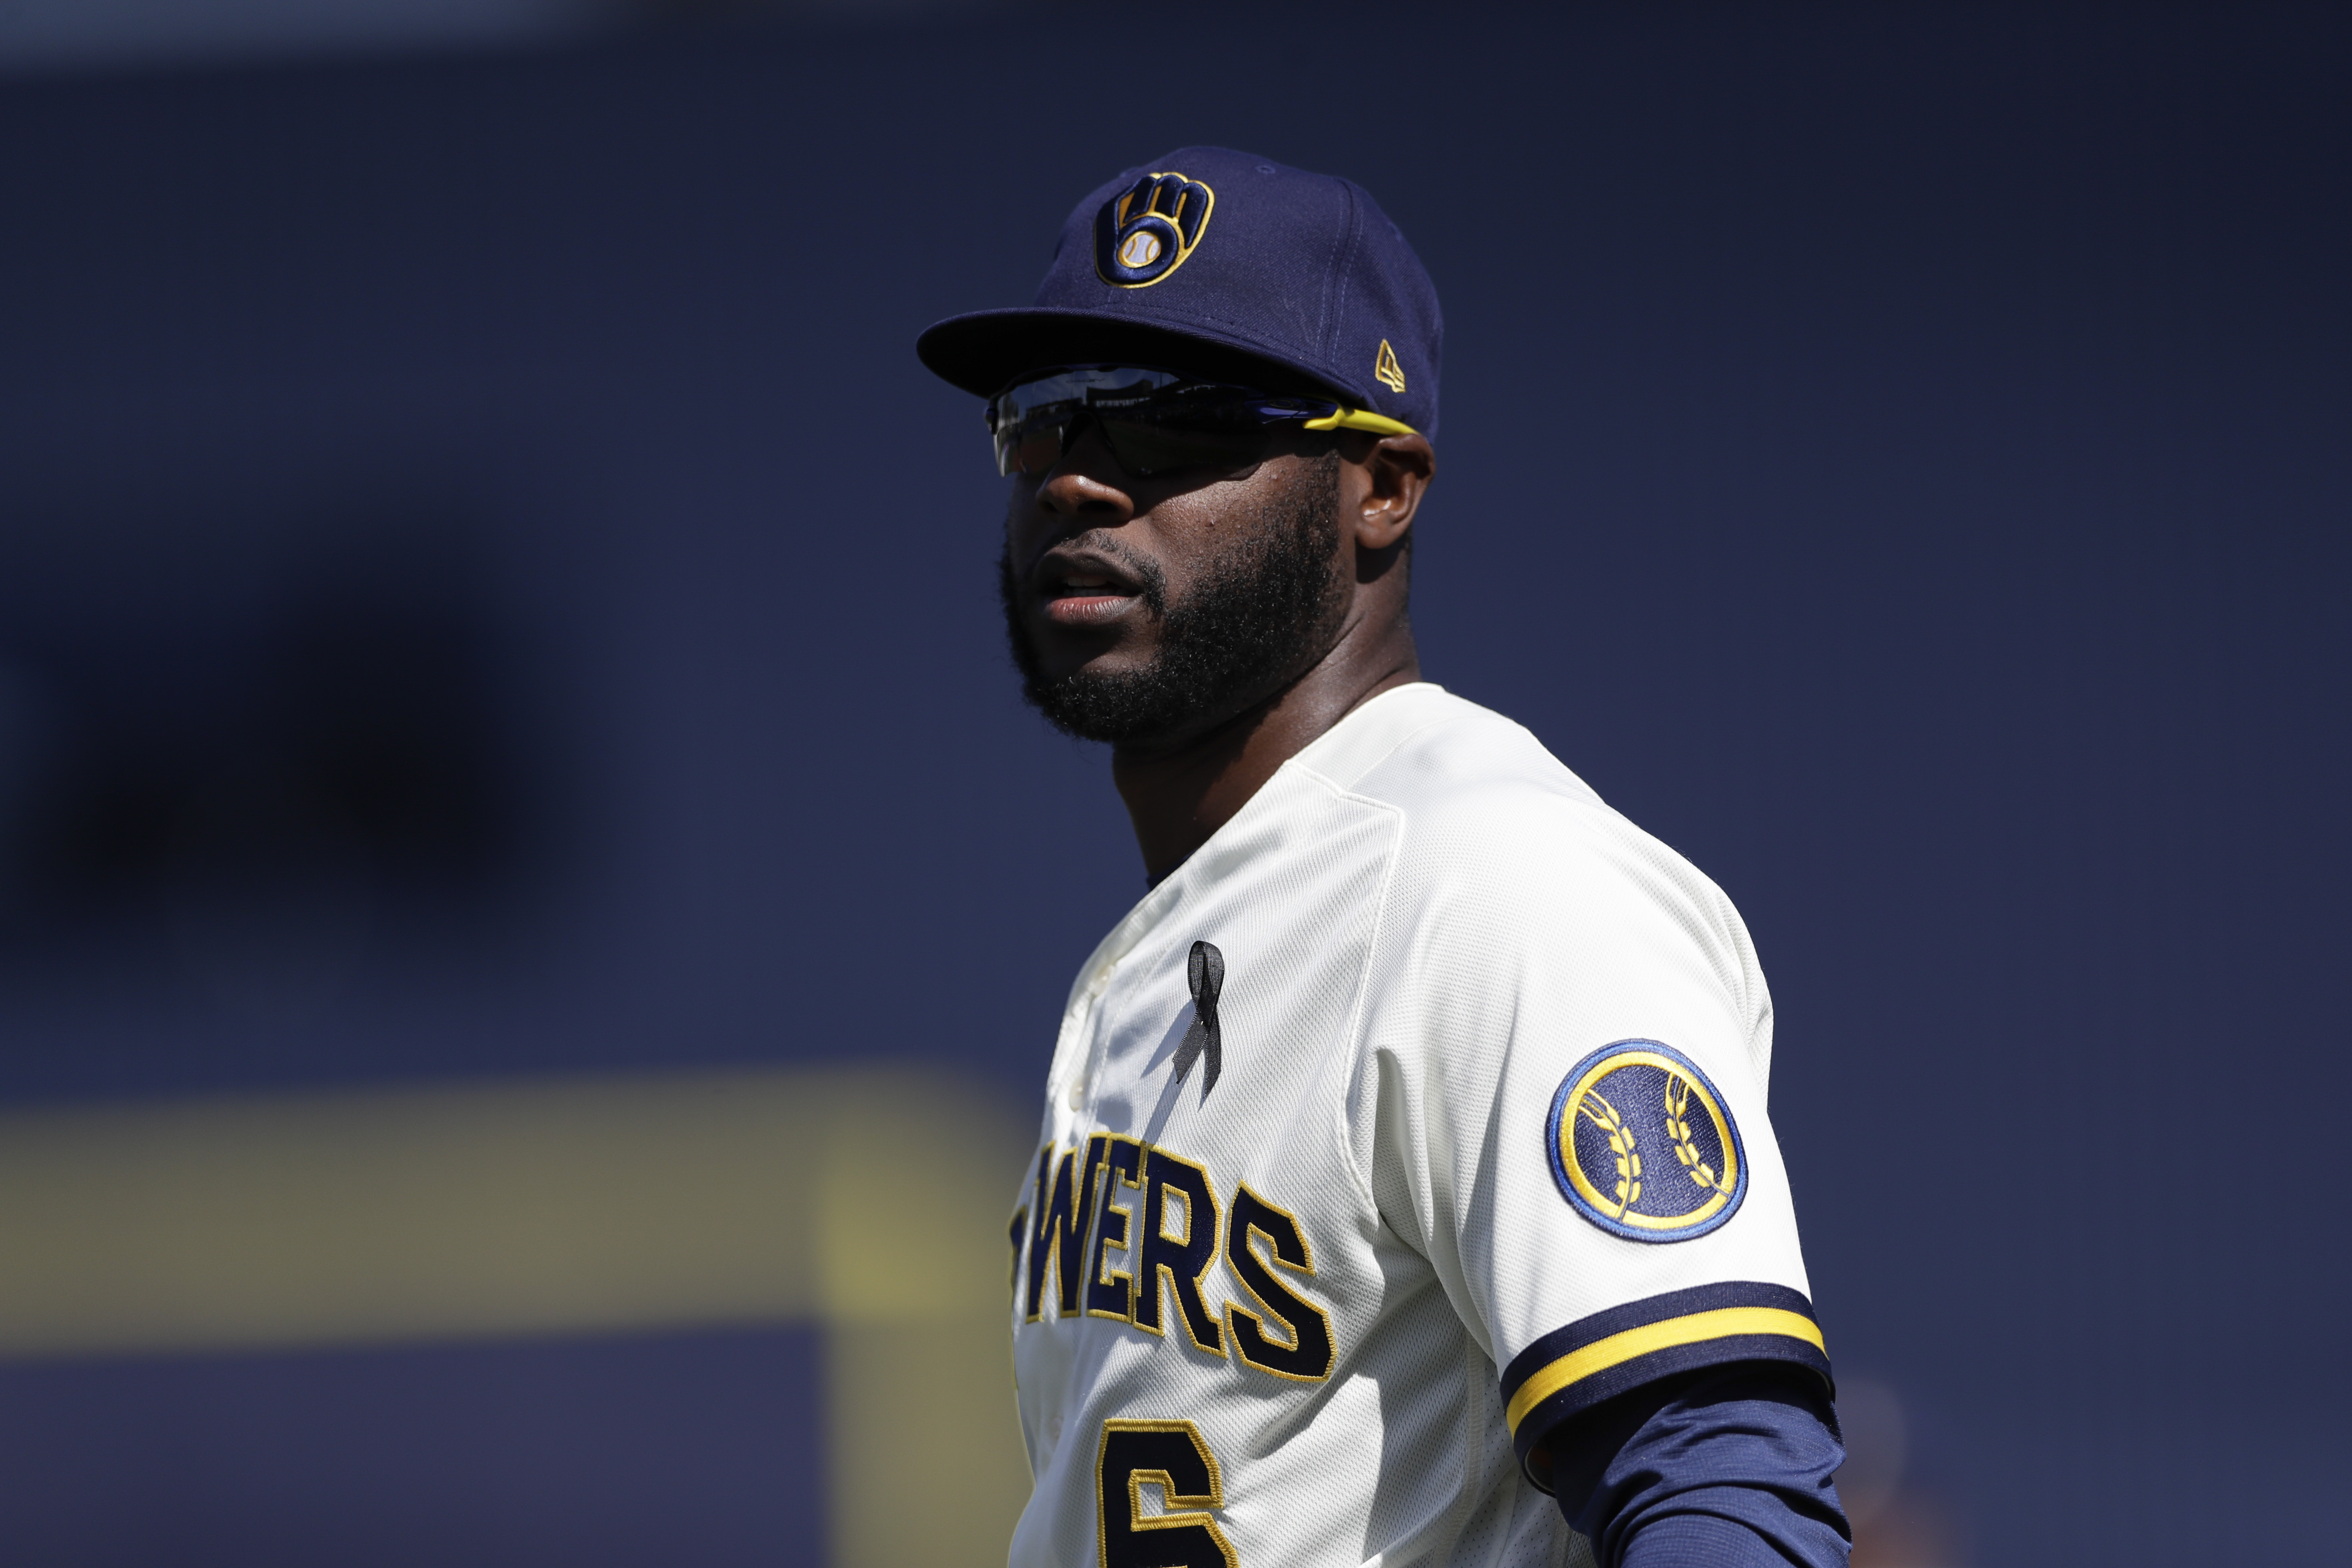 Lorenzo Cain opts out: Brewers star becomes 16 MLB player to sit